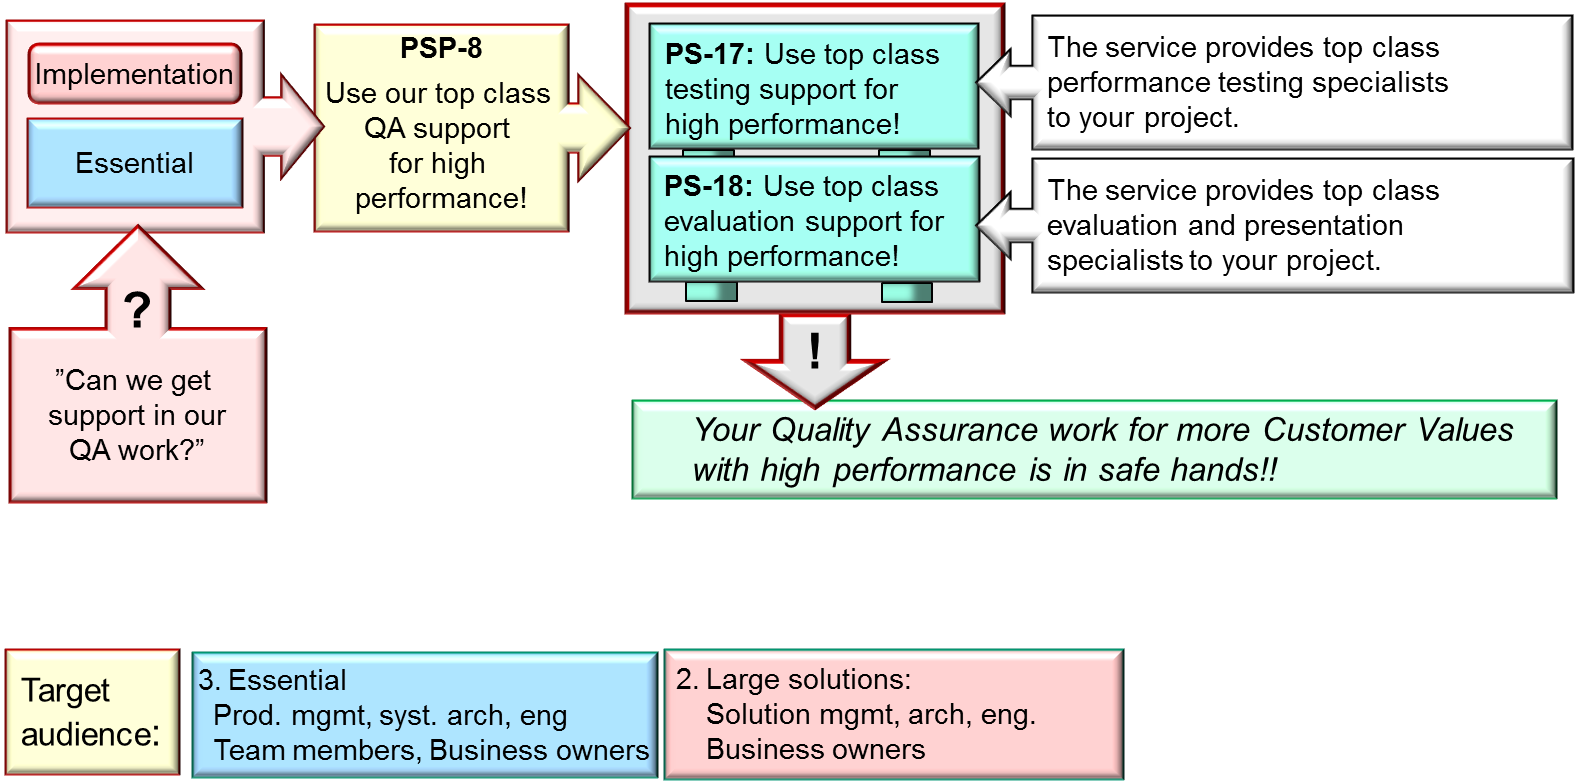 FIG-B-12-v81-220428_PSP-08_Use_top_class_QA_support